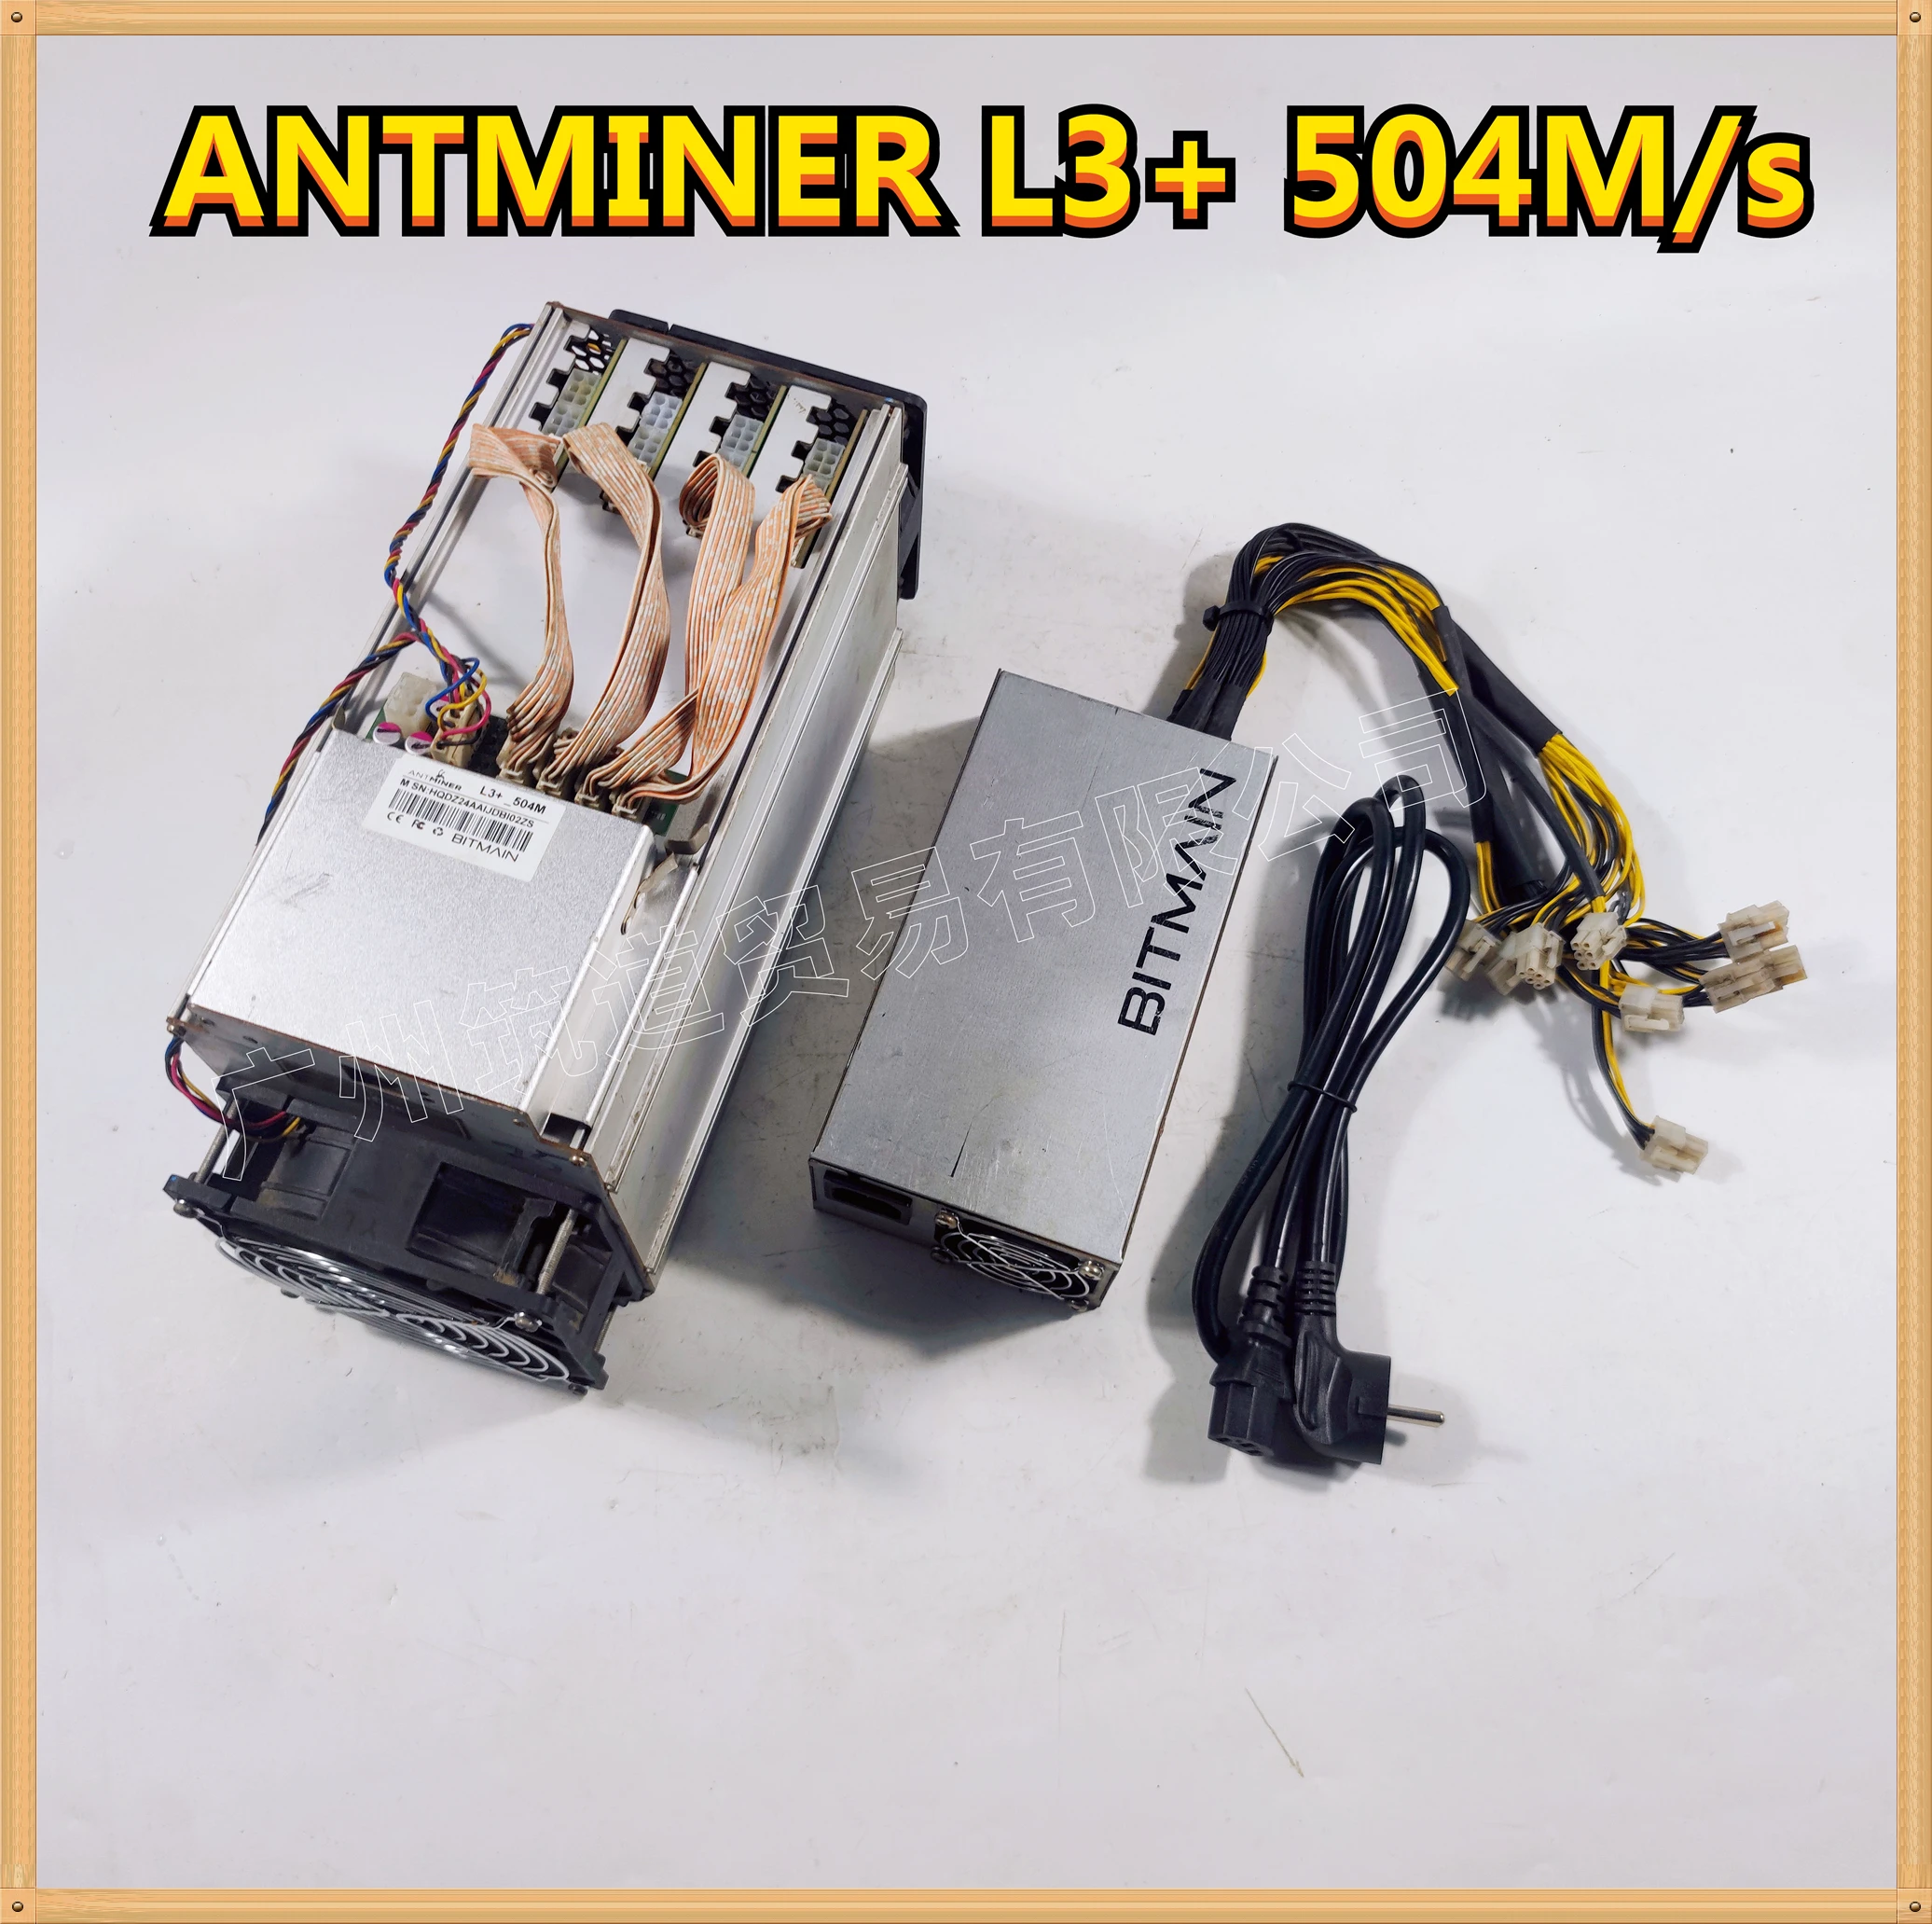 

Used ANTMINER L3+ LTC 504M with Antminer 1600W PSU Scrypt Miner LTC Mining Machine 504M 800W on Wall Better Than ANTMINER L3